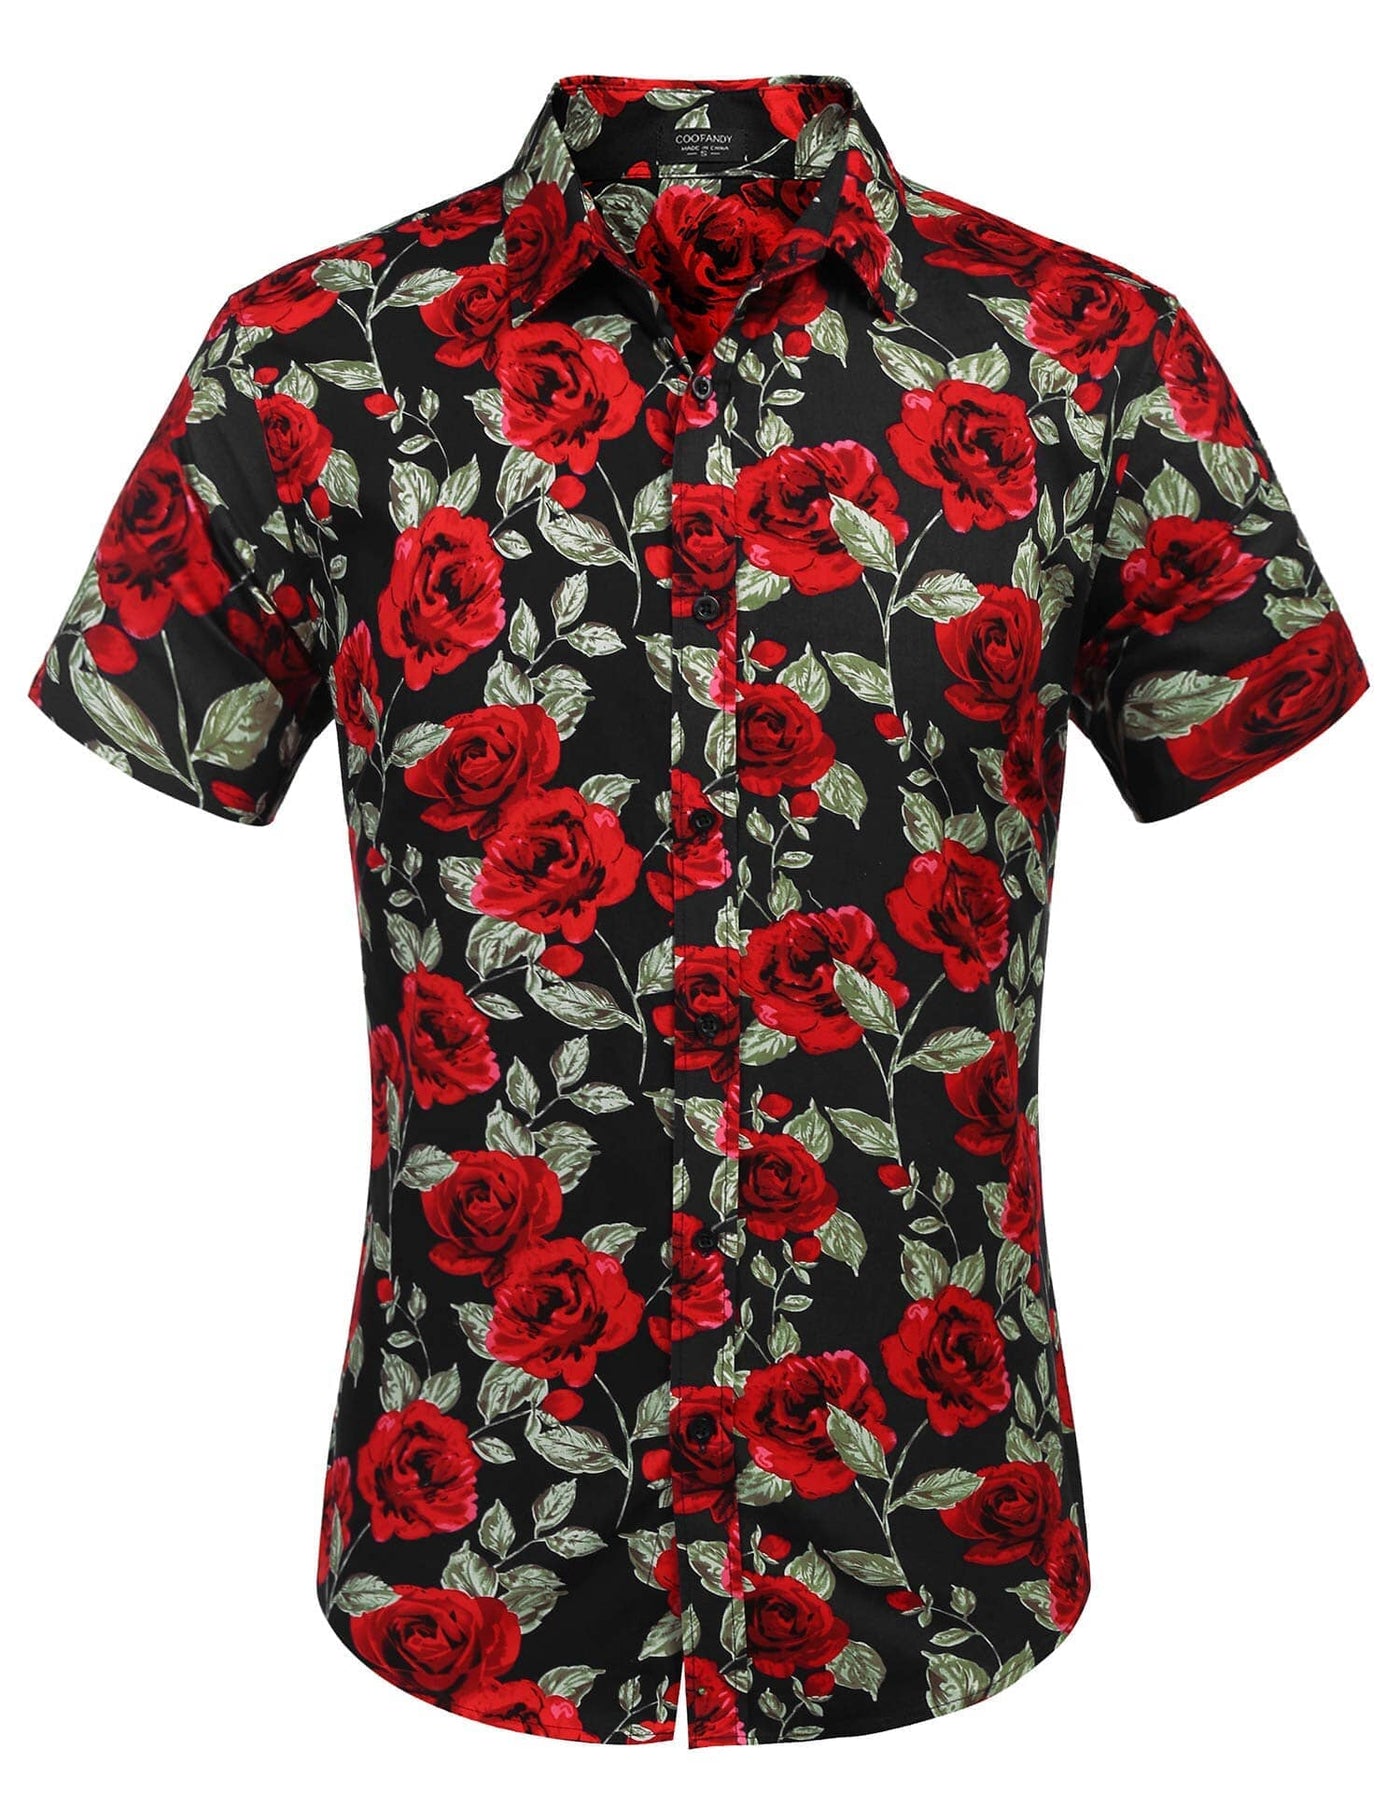 Coofandy Floral Shirts (US Only) Shirts coofandy 